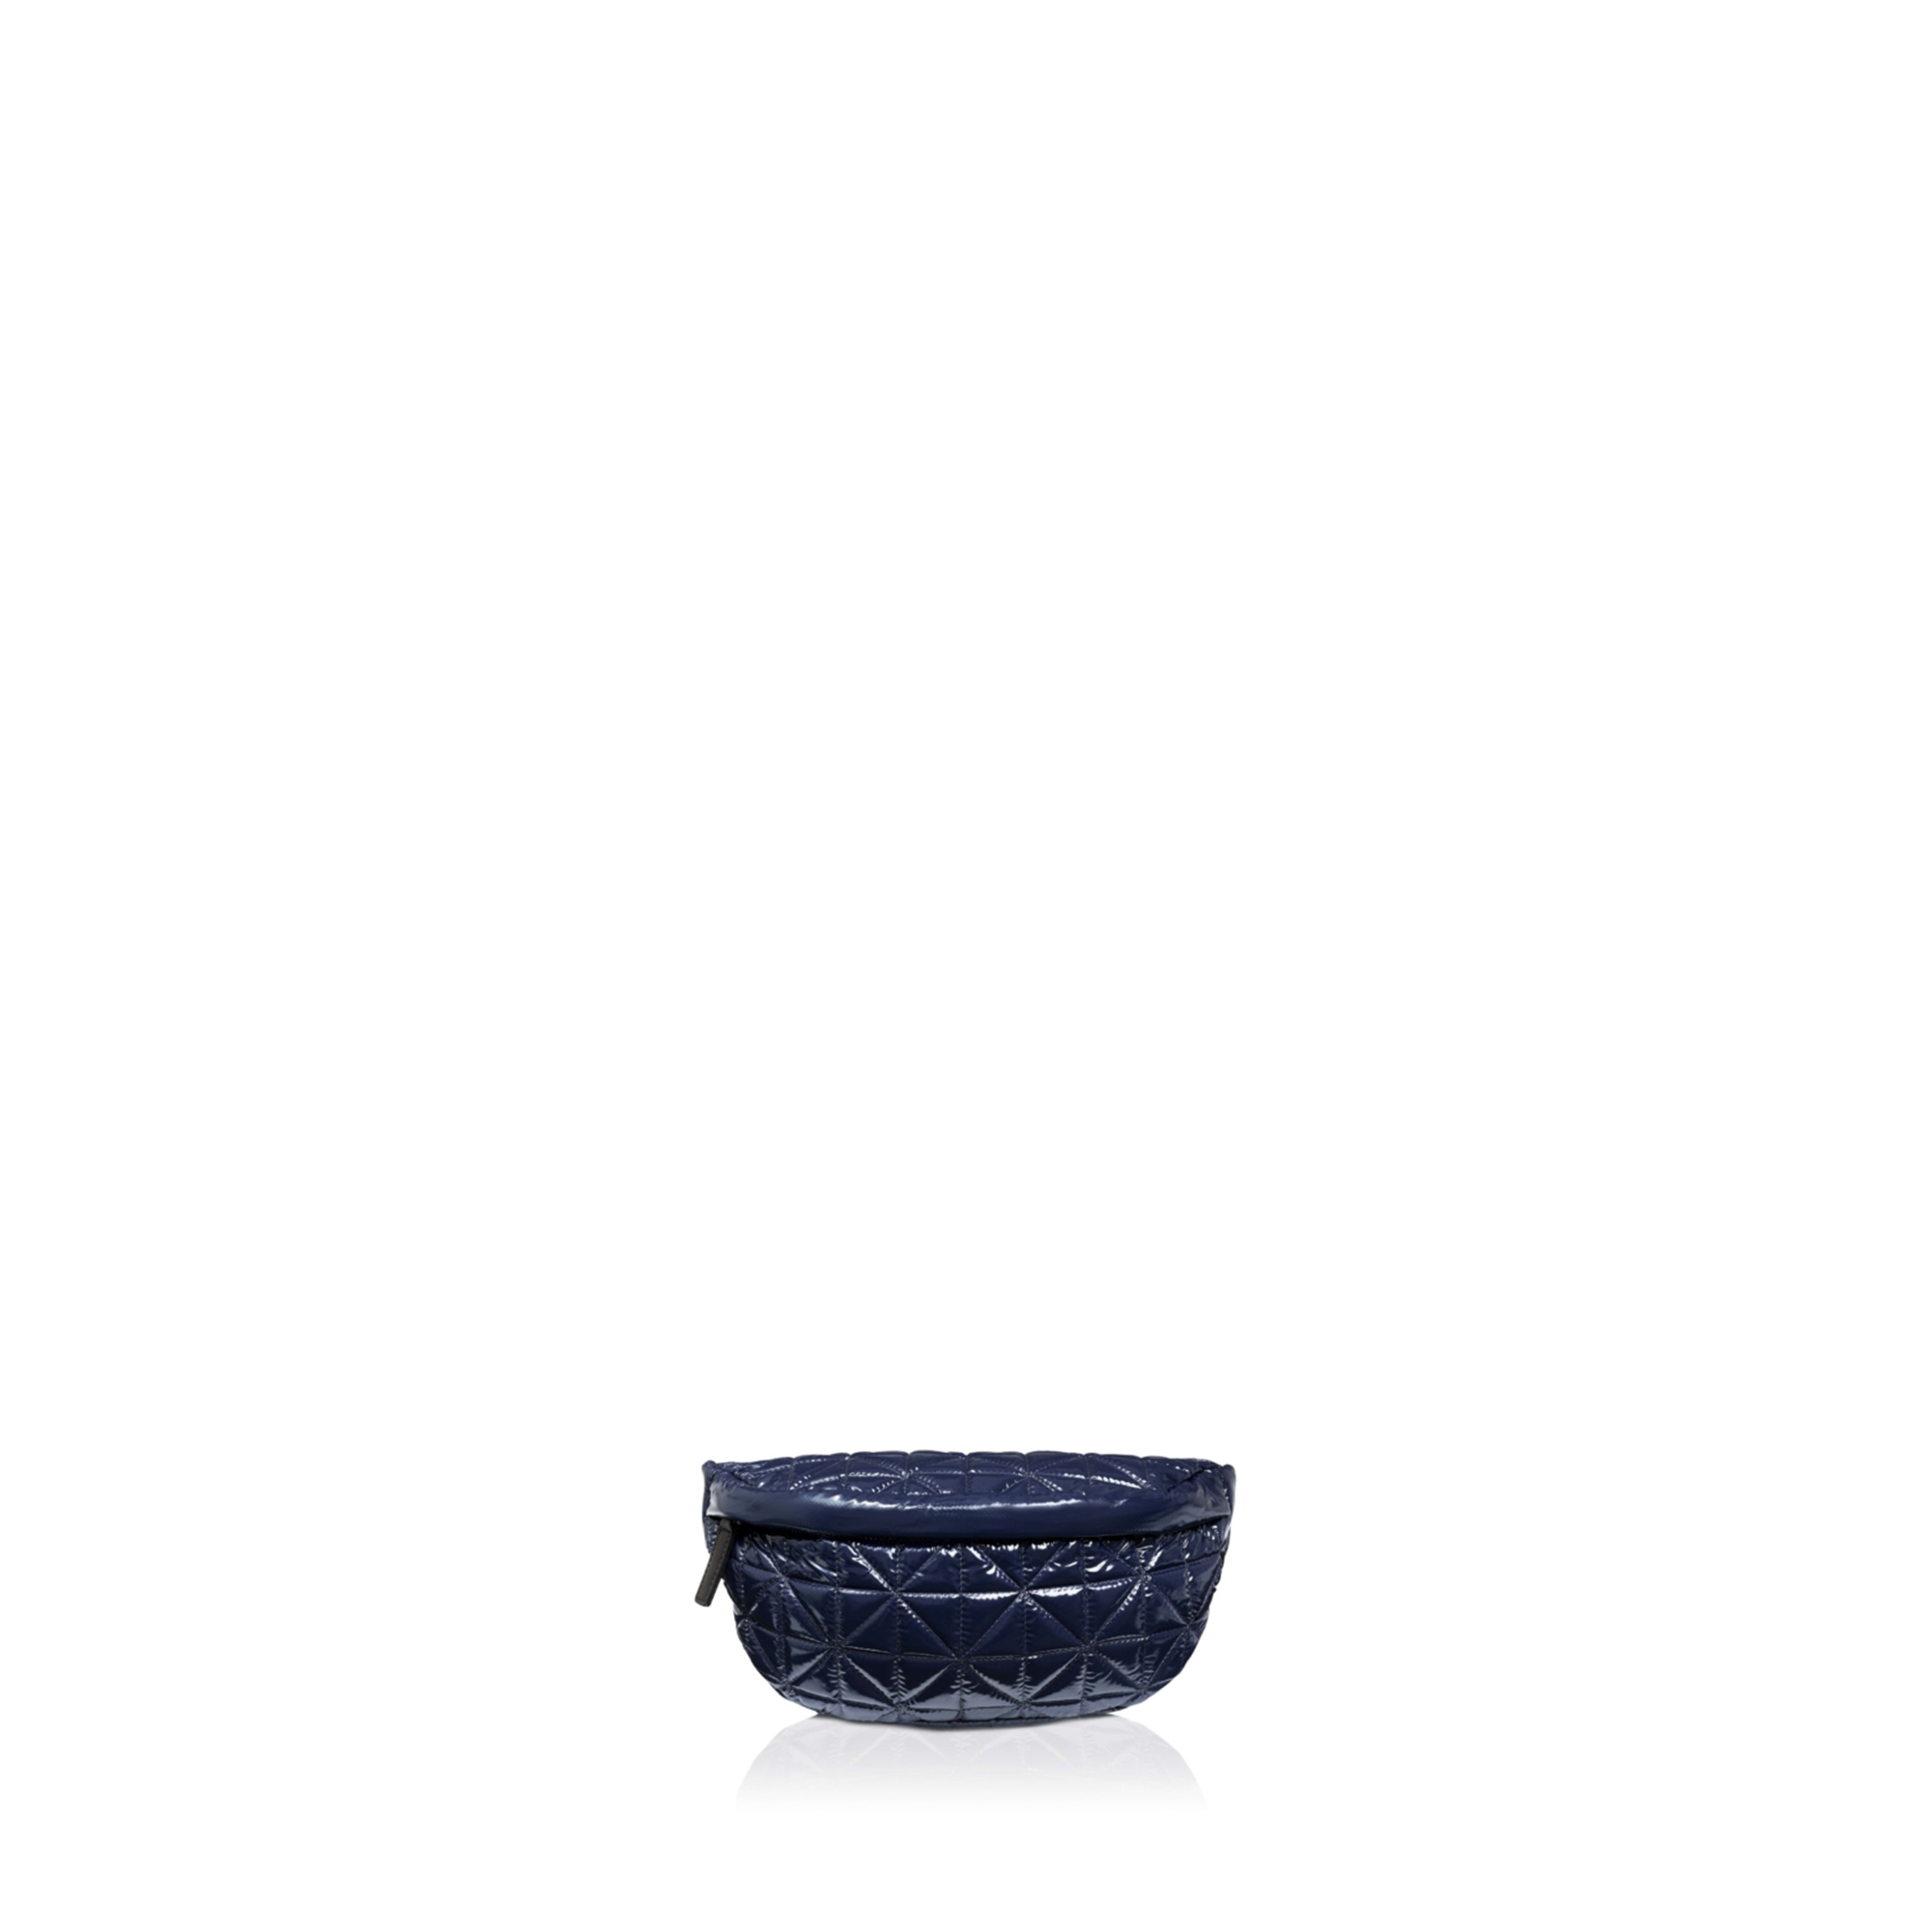 VEE COLLECTIVE FANNY PACK - 107-200-323 MIDNIGHT BLUE